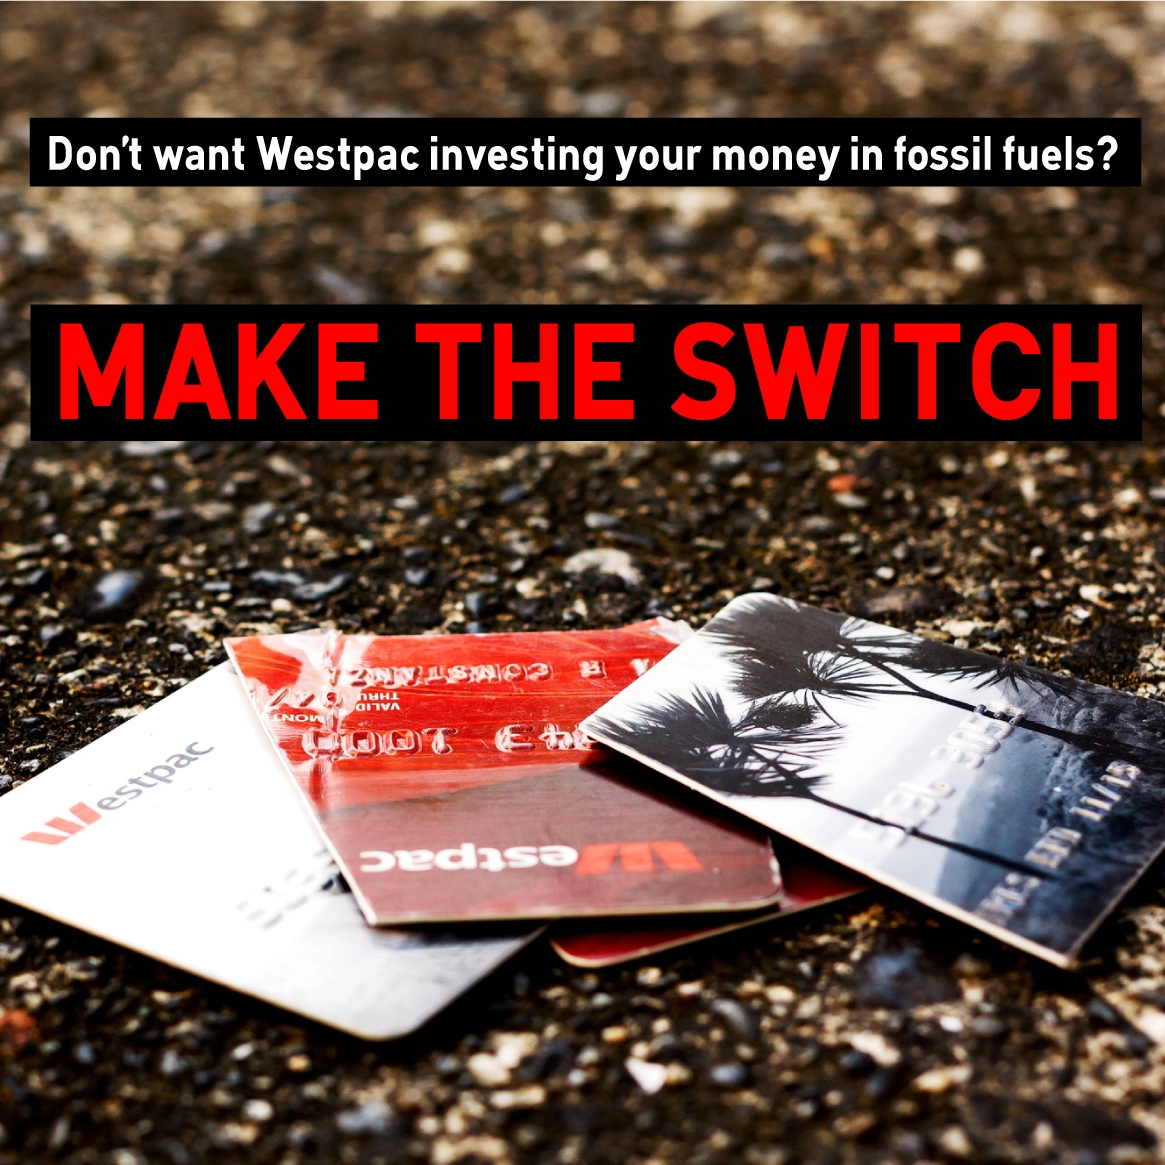 Don't want Westpac investing your money in new coal mining? - April 7-12 - Make the switch to a bank that is fossil free.